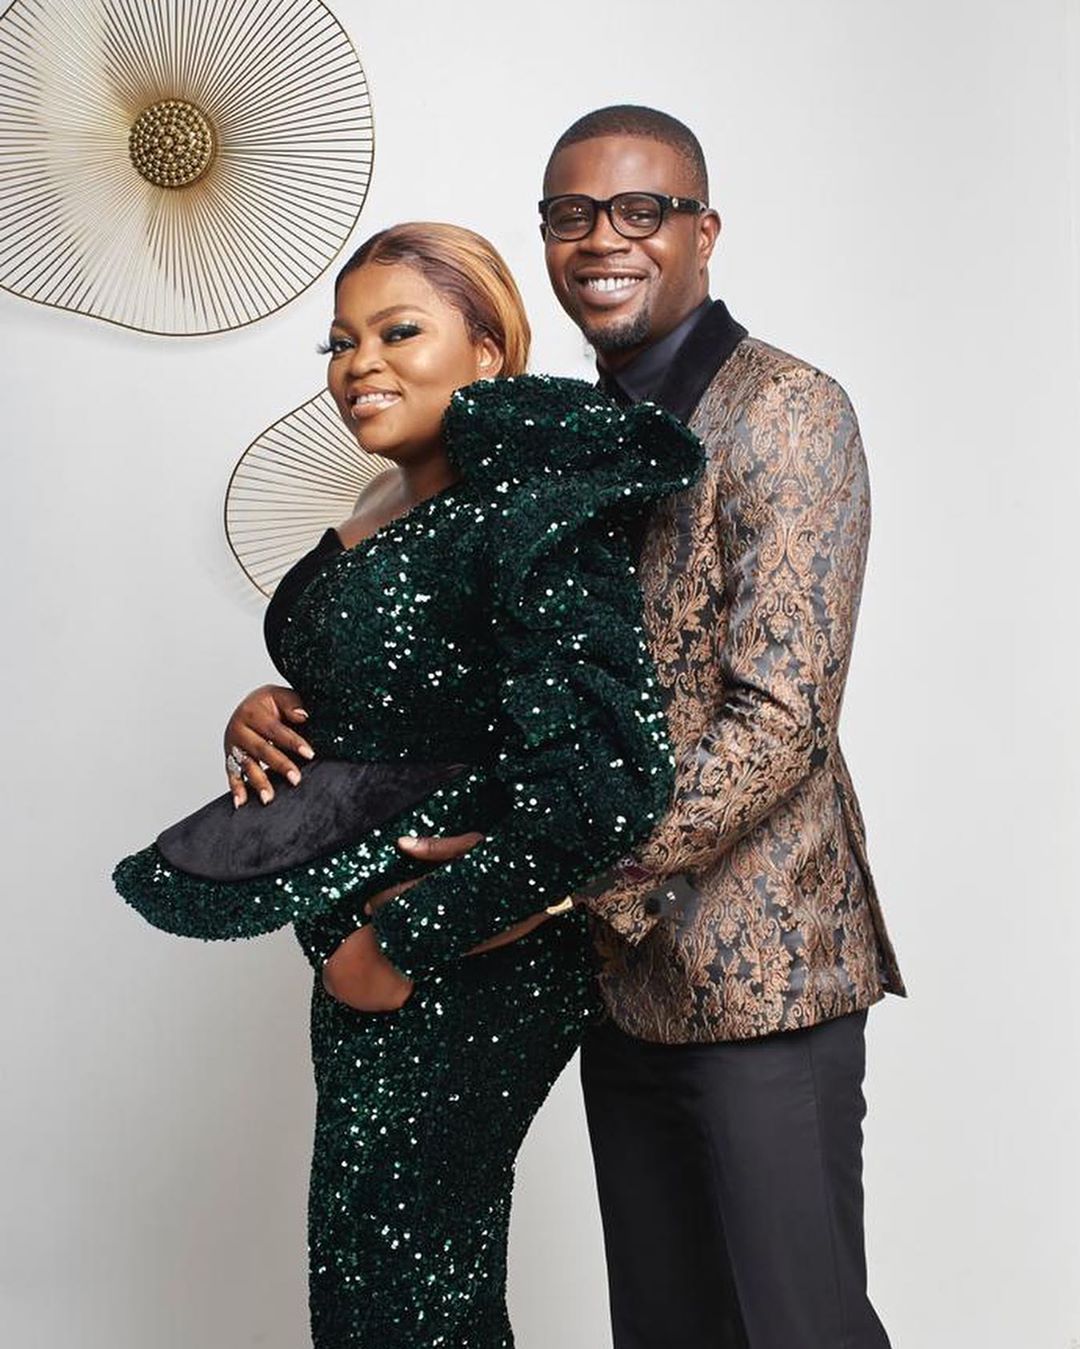 JJC Skillz declares love for Funke Akindele as he shares secrets to a happy marriage from an Imam